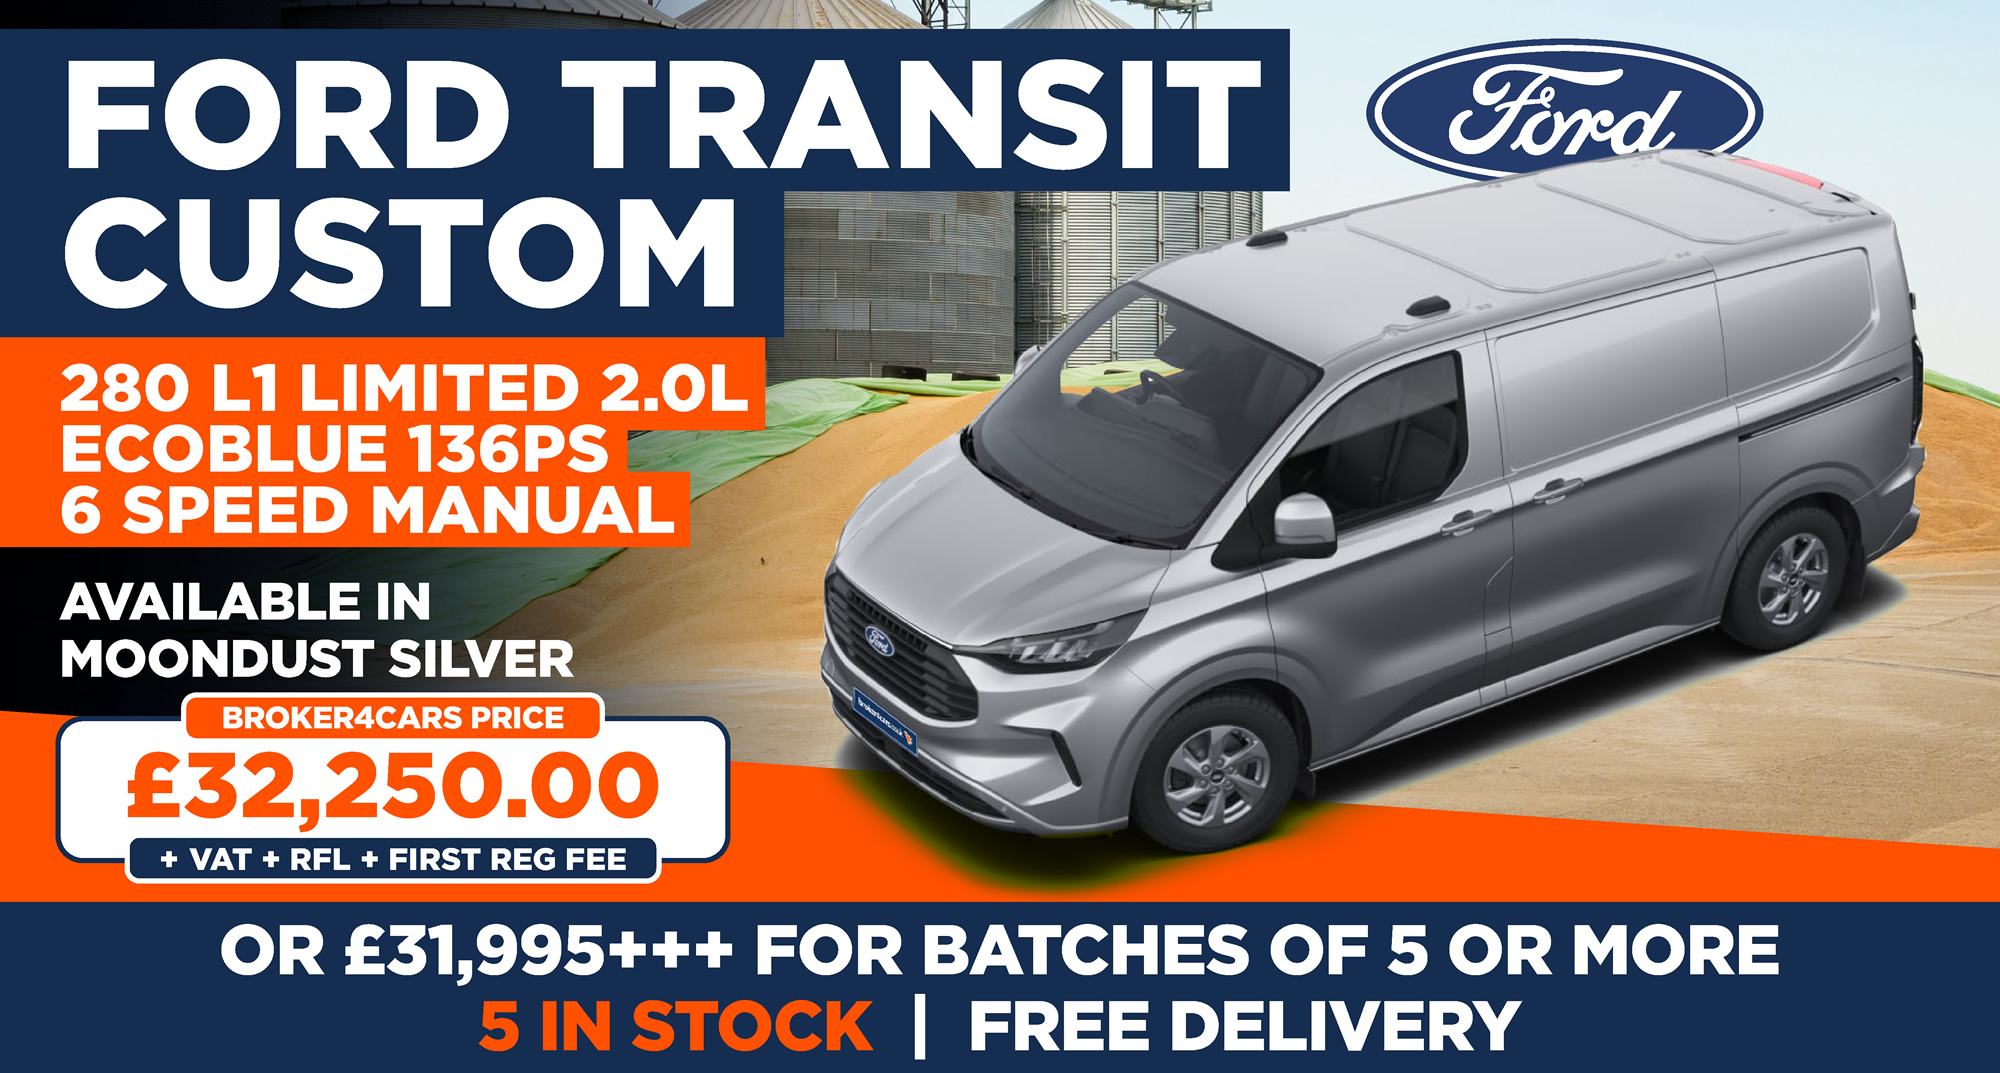 FORD TRANSIT CUSTOM 280 L1 Limited 2.0l EcoBlue 136ps 6 speed manual MoonstoneALL IN STOCK WITH FREE DELIVERY. 5 in Stock. All above prices are + VAT + RFL + 1st Reg Fee